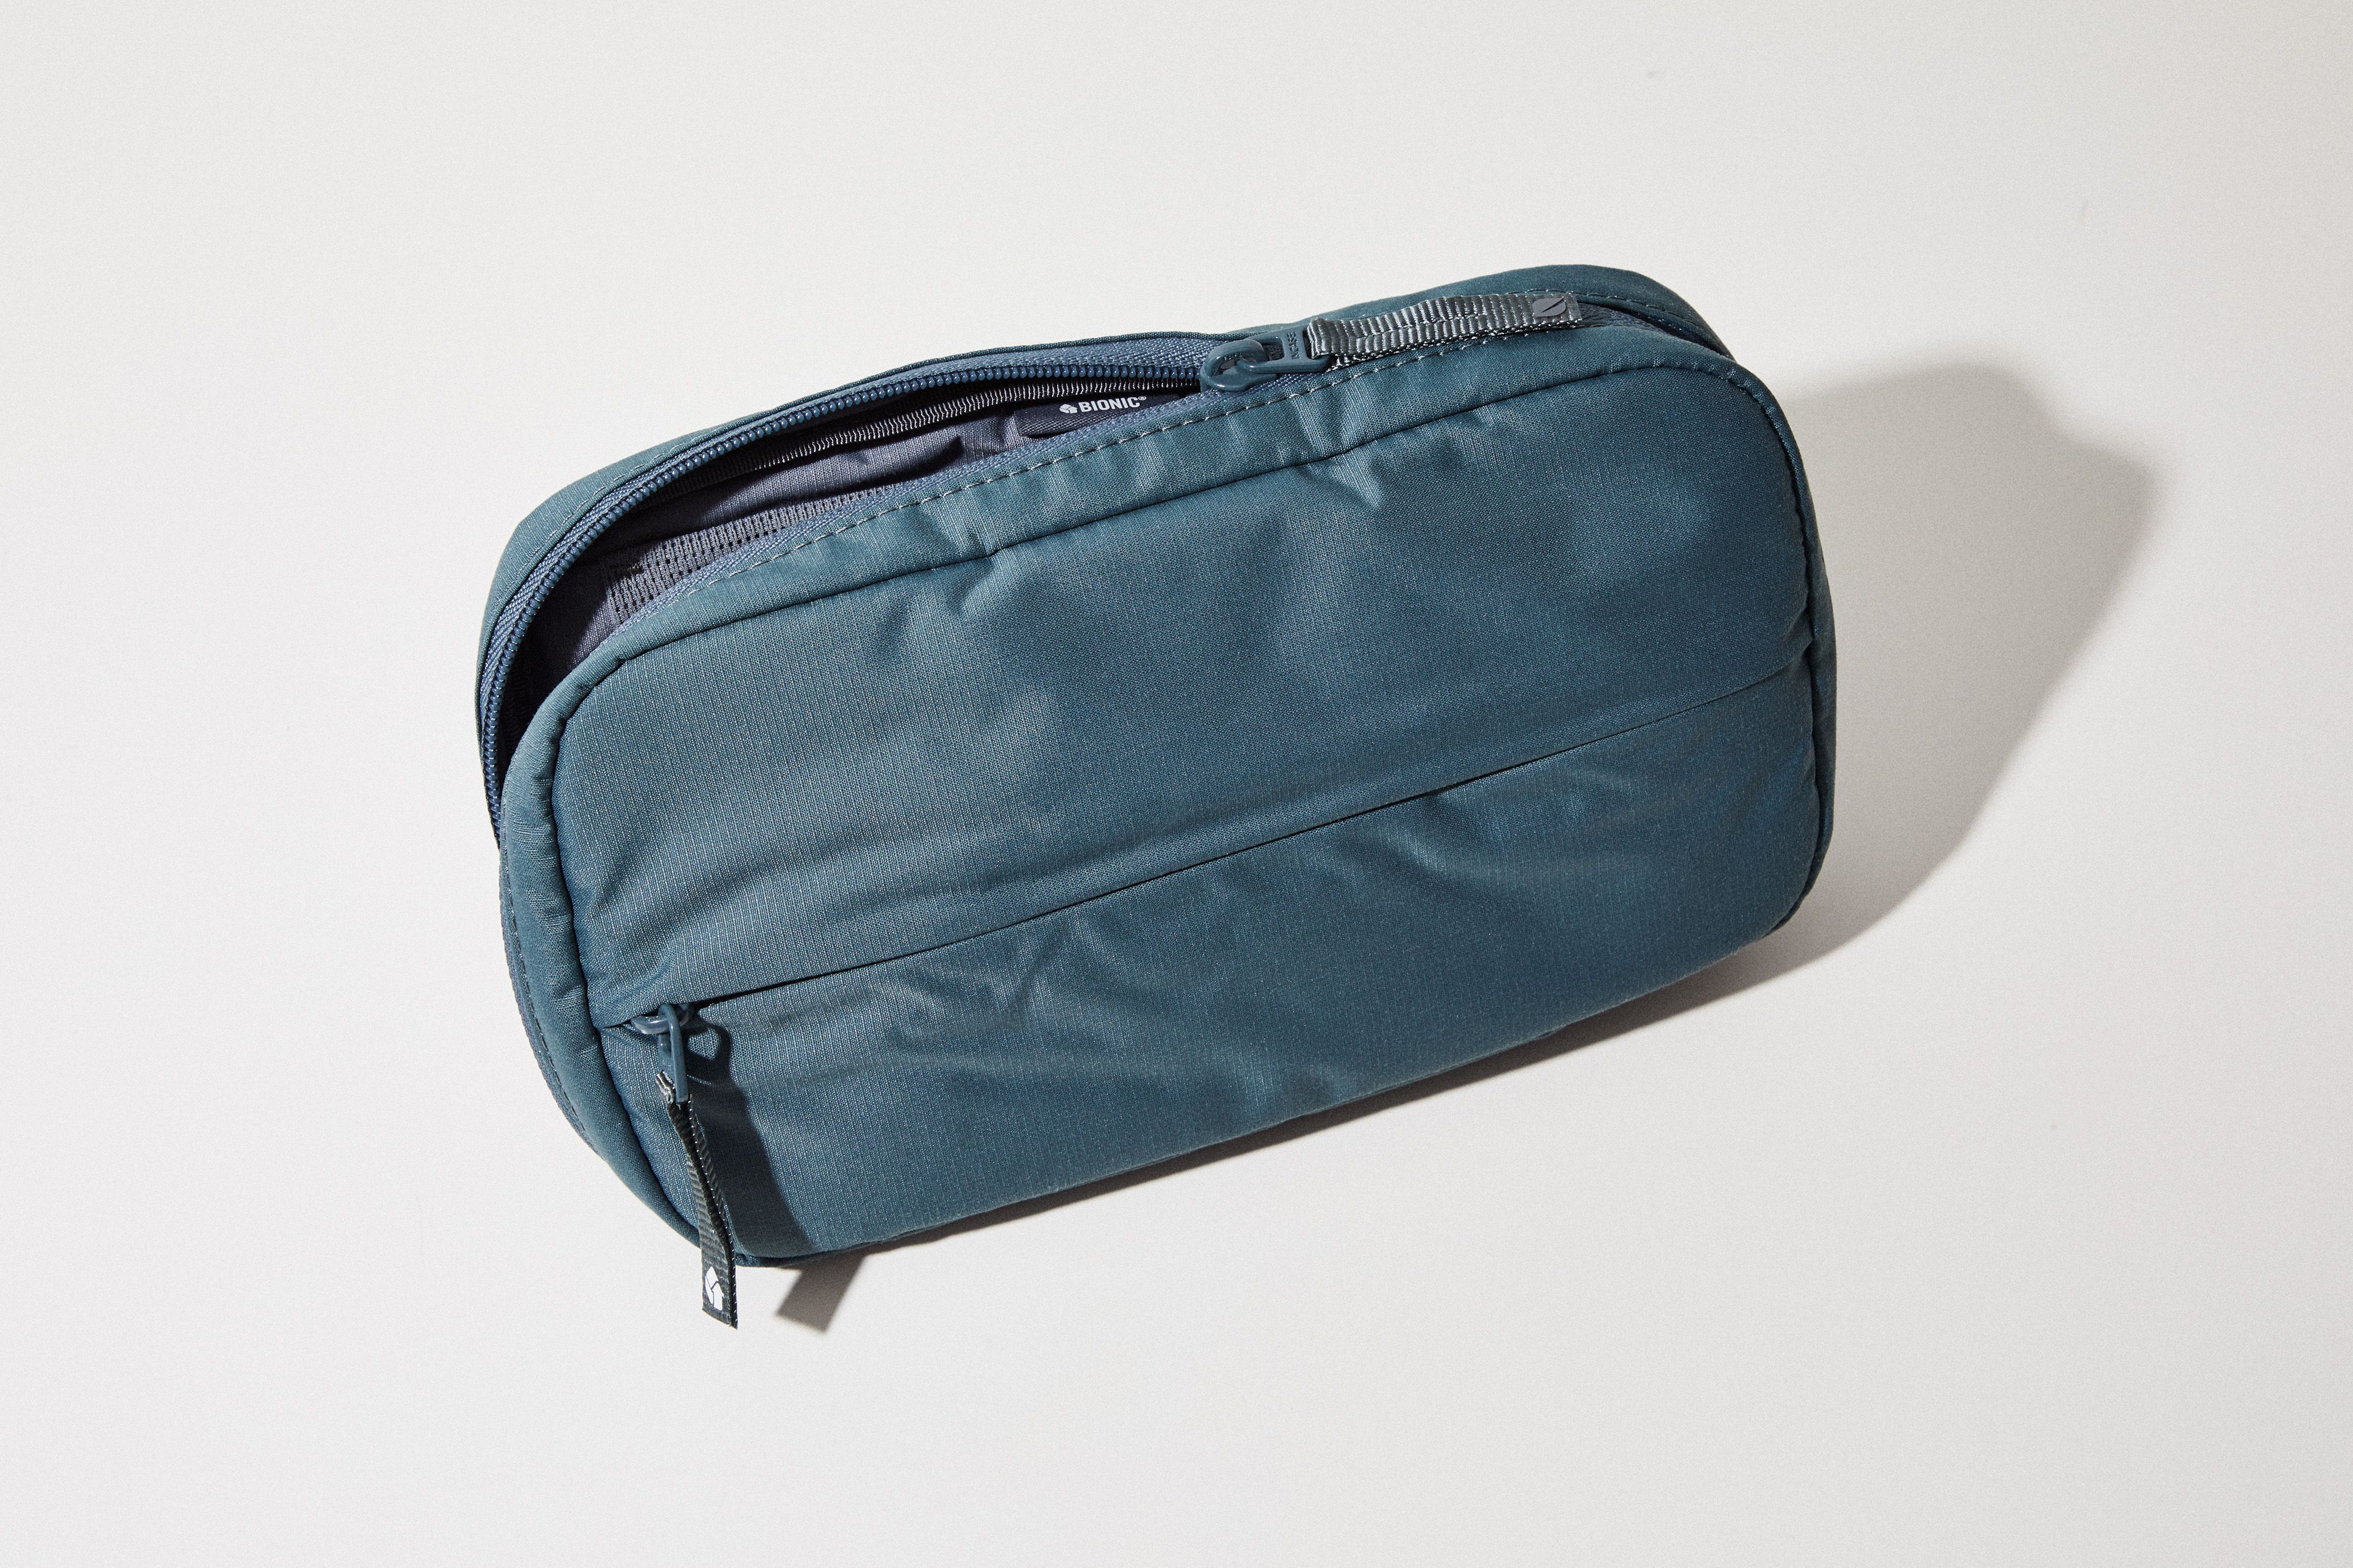 Incase's Tech Organizer Uses Bionic Fabric Recycled from the Ocean